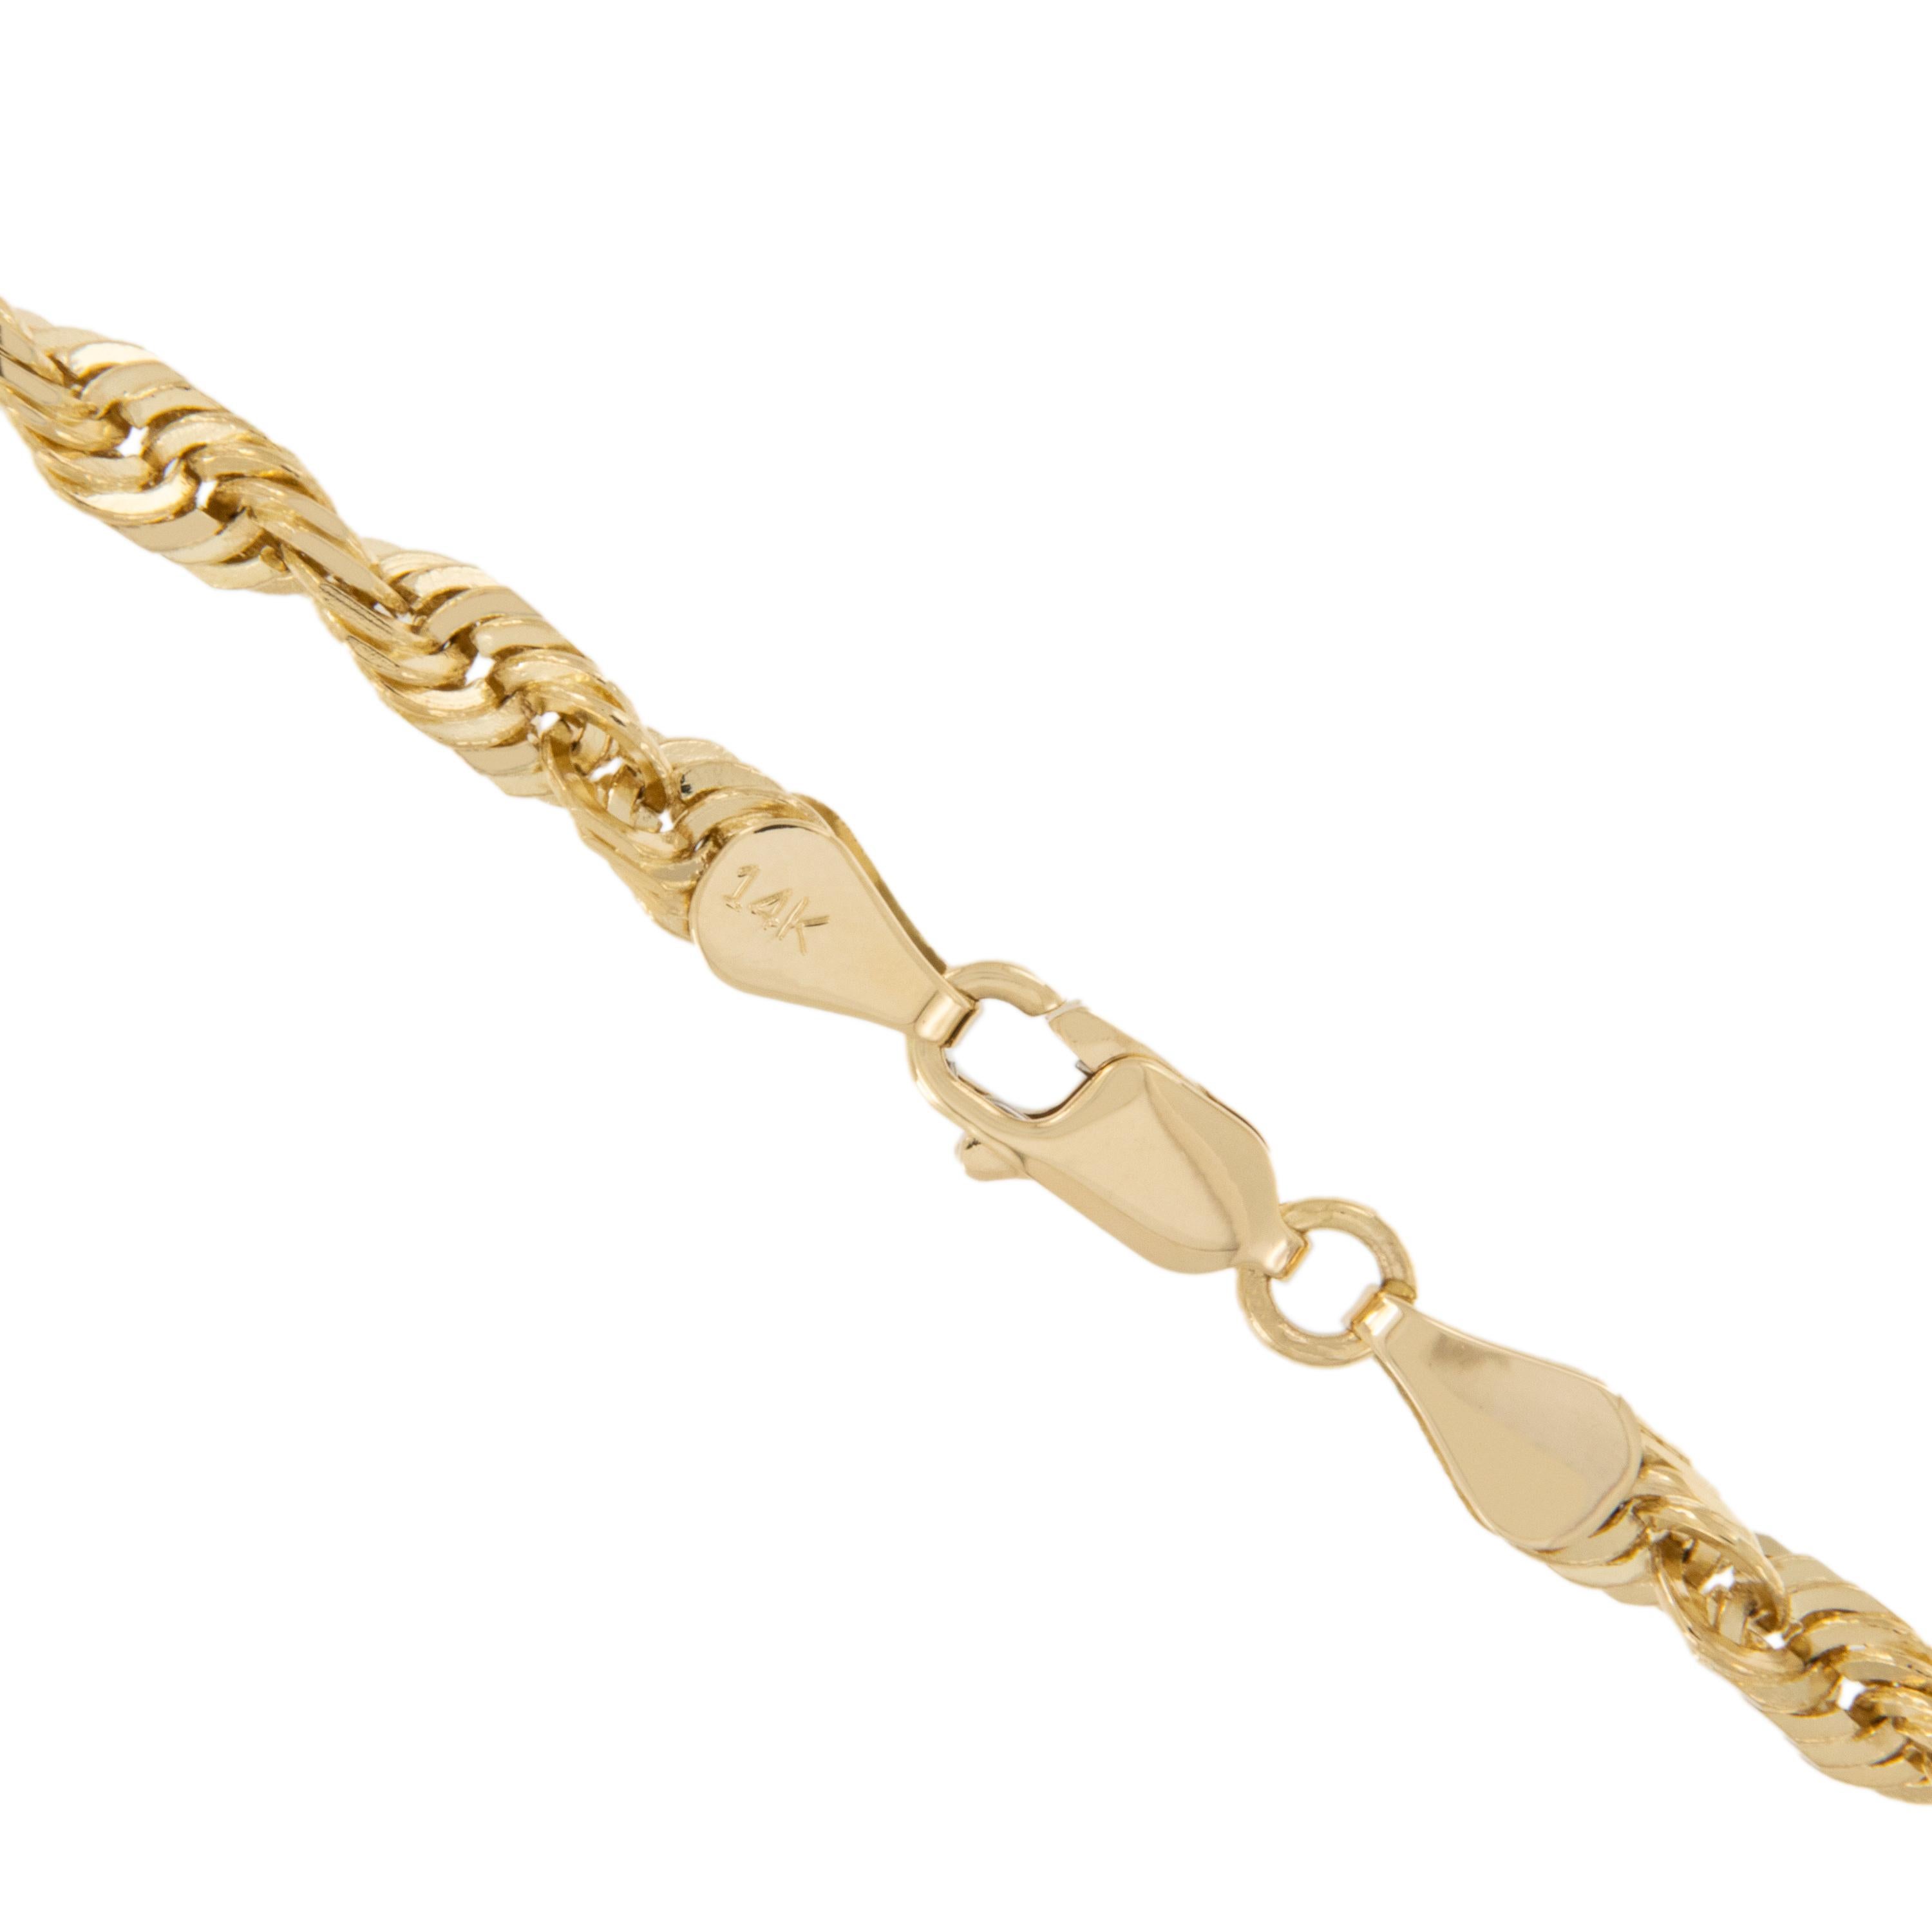 There's no fooling Mr. T - this classic diamond cut rope chain looks fantastic by itself or as the holder of your special pendant. Chain is 14 karat yellow gold, an impressive 5mm wide, 22